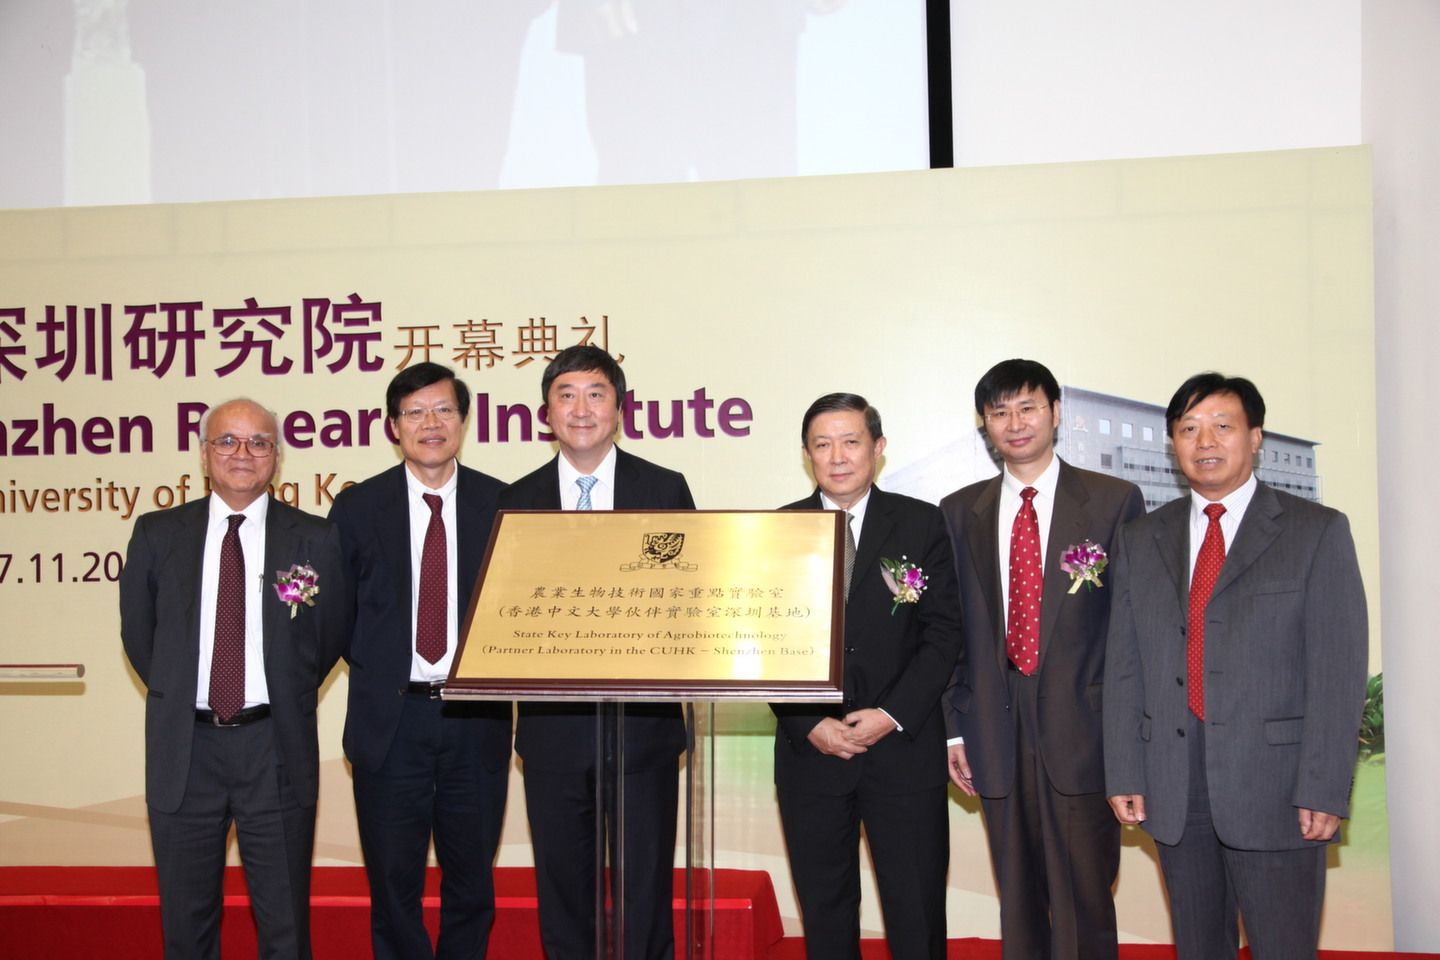 Opening Ceremony of CUHK Shenzhen Research Institute (2011)